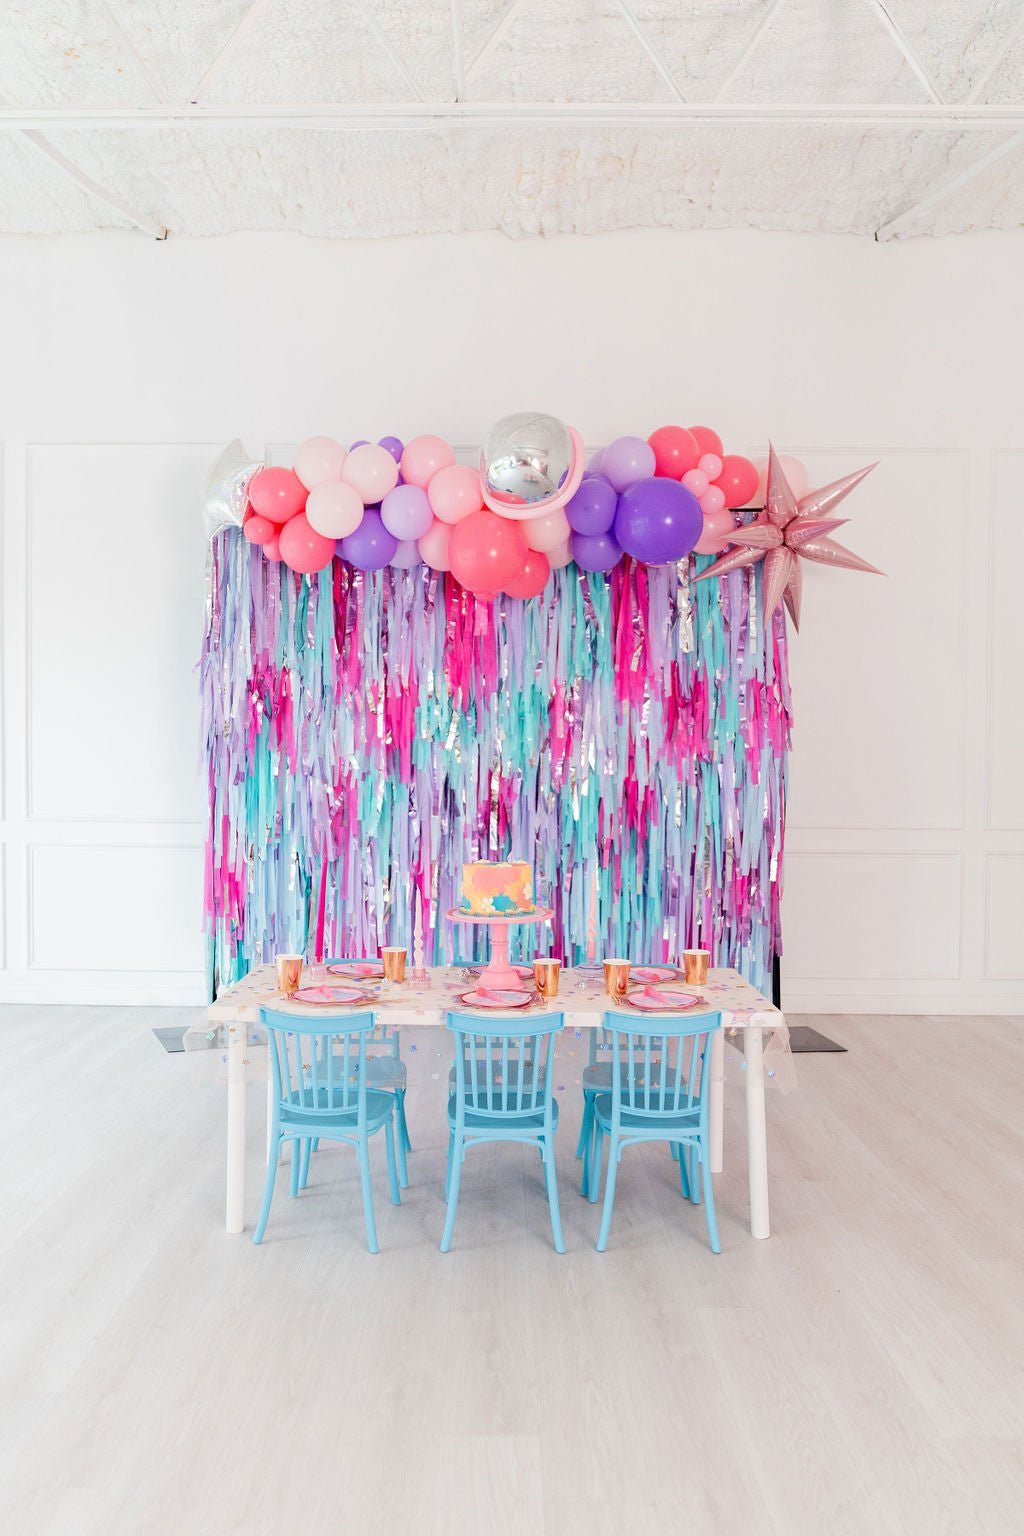 Ready To Ship: Interstellar Fringe Backdrop - Oh My Darling Party Co-backdrops for partyBirthday Partybridal party #Fringe_Backdrop#